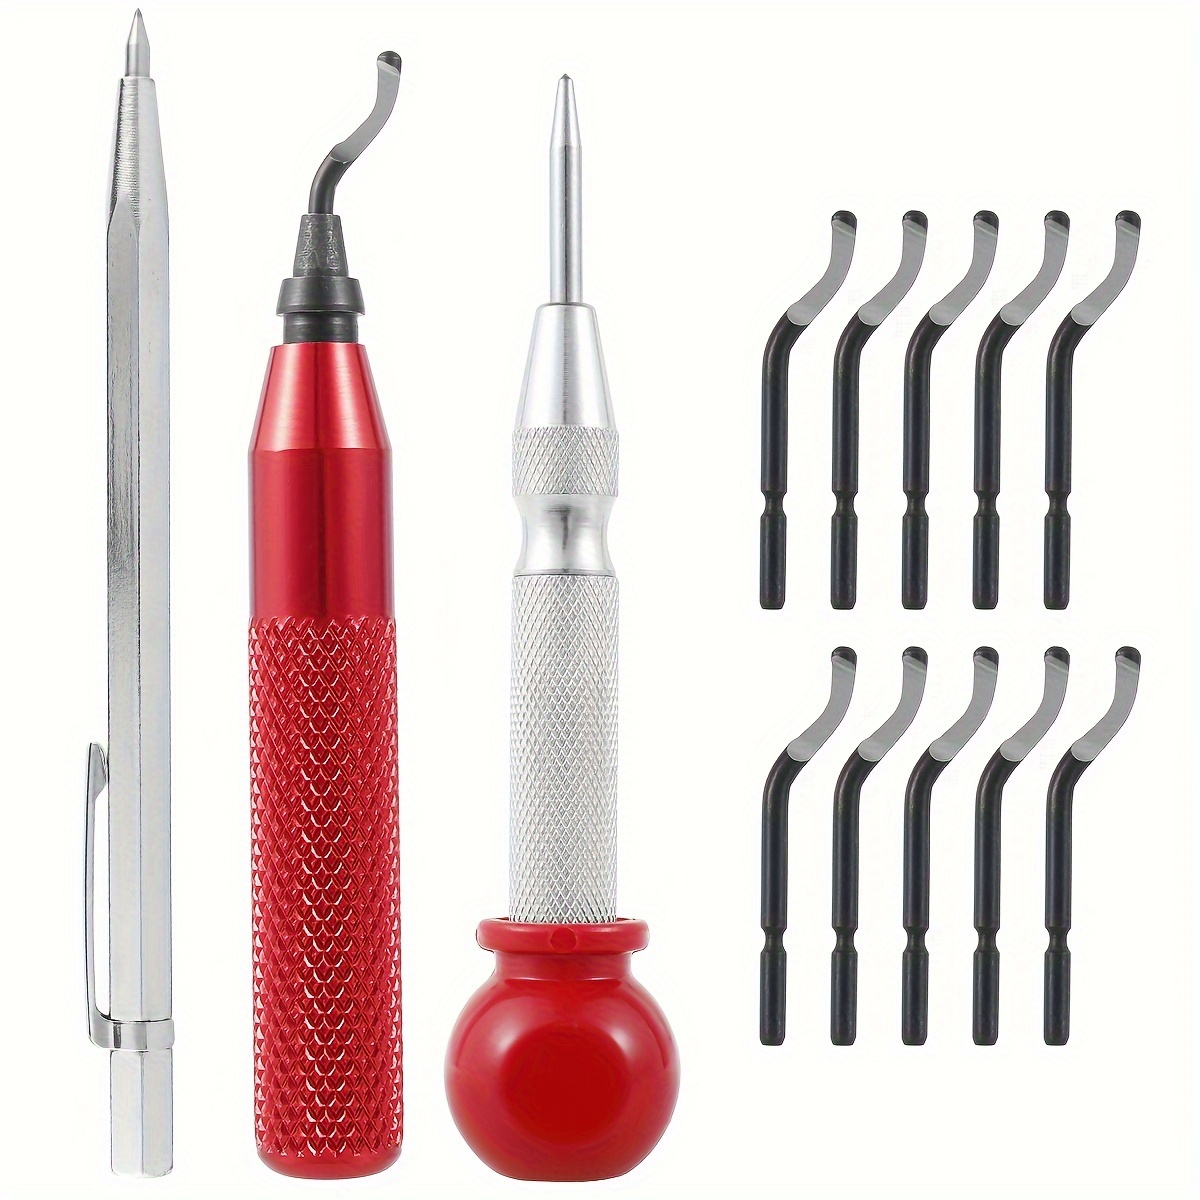 Deburring Tool With 10Pcs Rotary Deburr Blades Burr Remover Hand Tool Of  NB1100 Handle For Wood, PVC, Plastic, Metal, Resin, 3D Printing